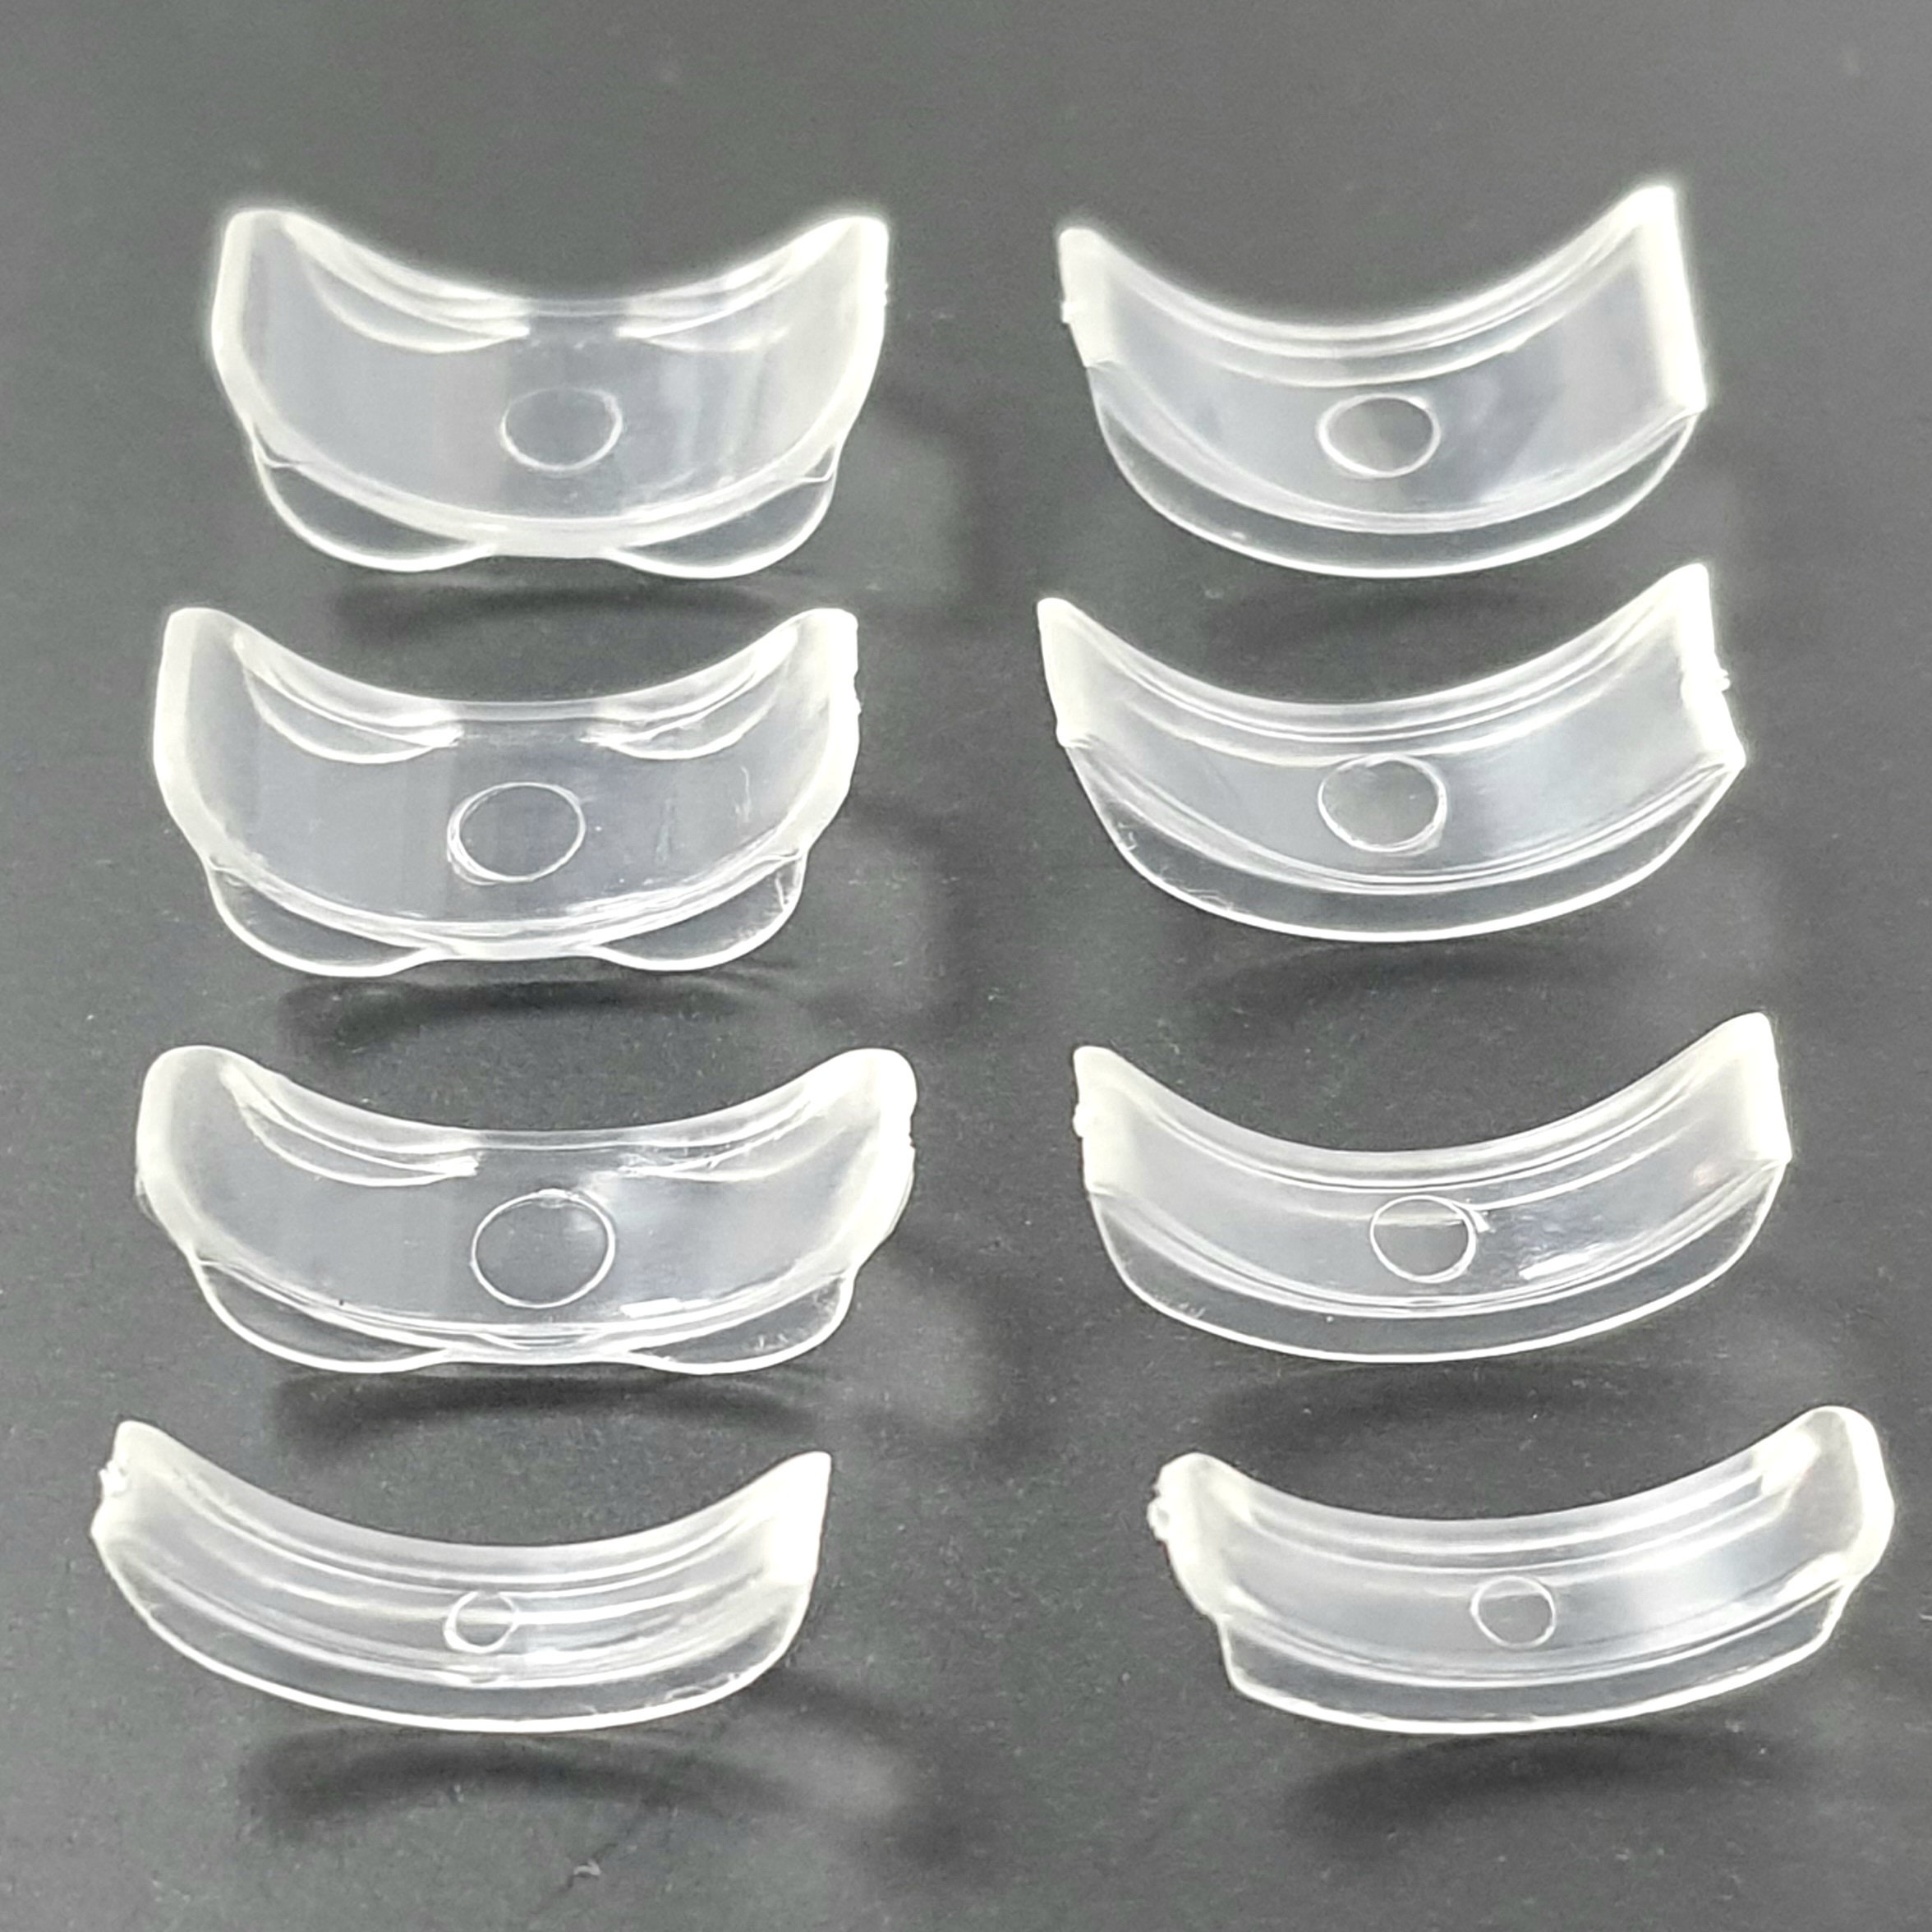 Ring Size Adjuster 12 Pack Super Soft for Loose Rings Jewelry Guard, Ring  Fitter, Sizer 2 Styles 4 Sizes Free Shipping With Tracking. 